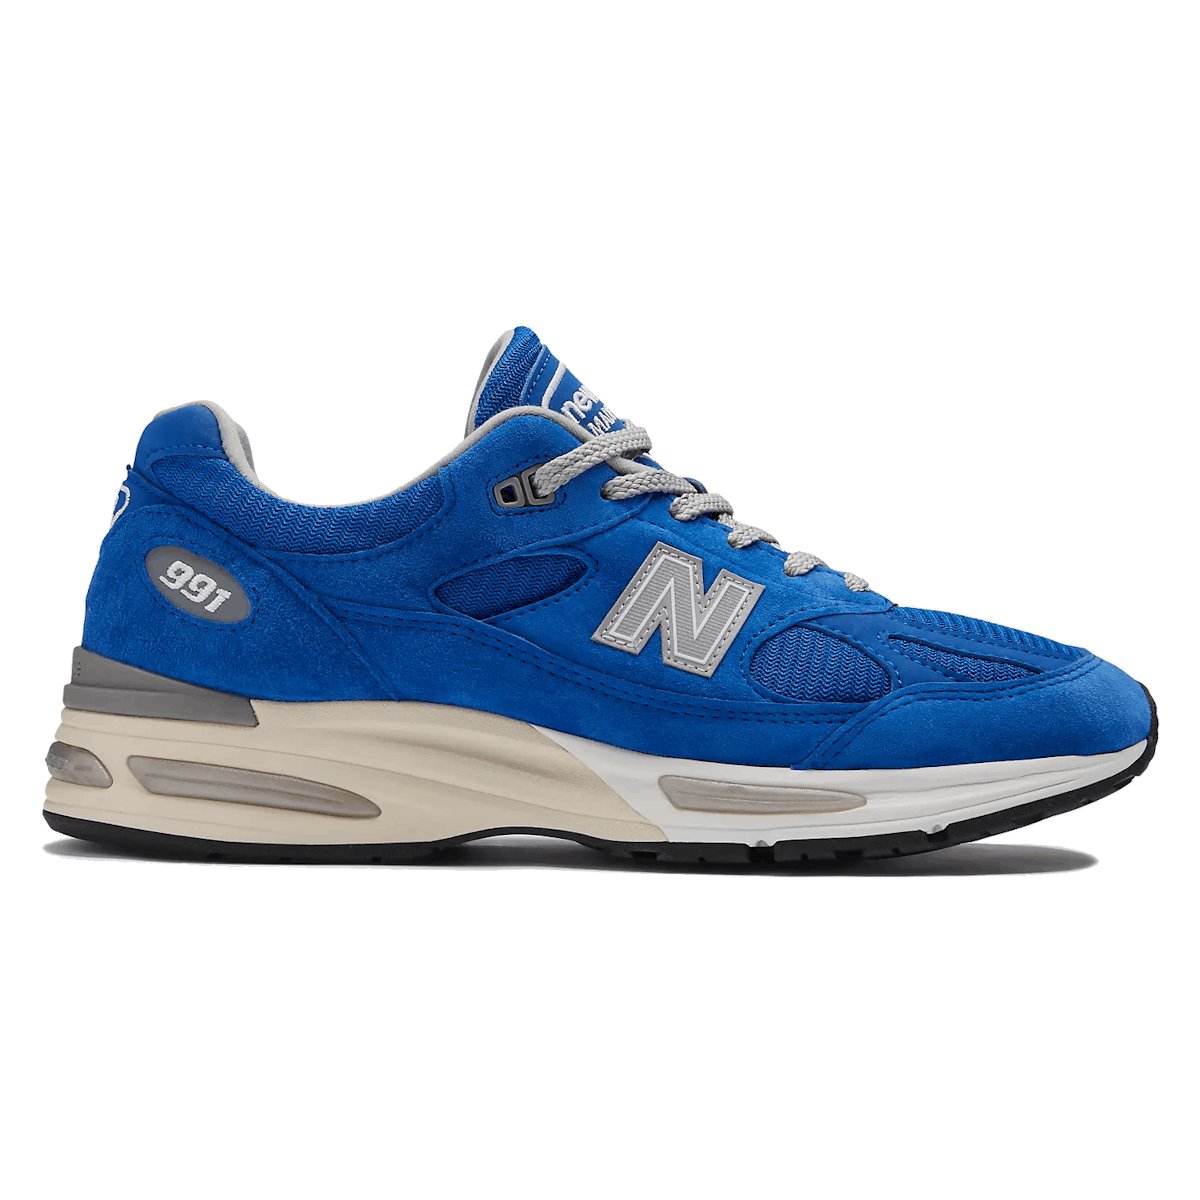 New Balance Made in UK 991v2 Brights Revival "Dazzling blue"